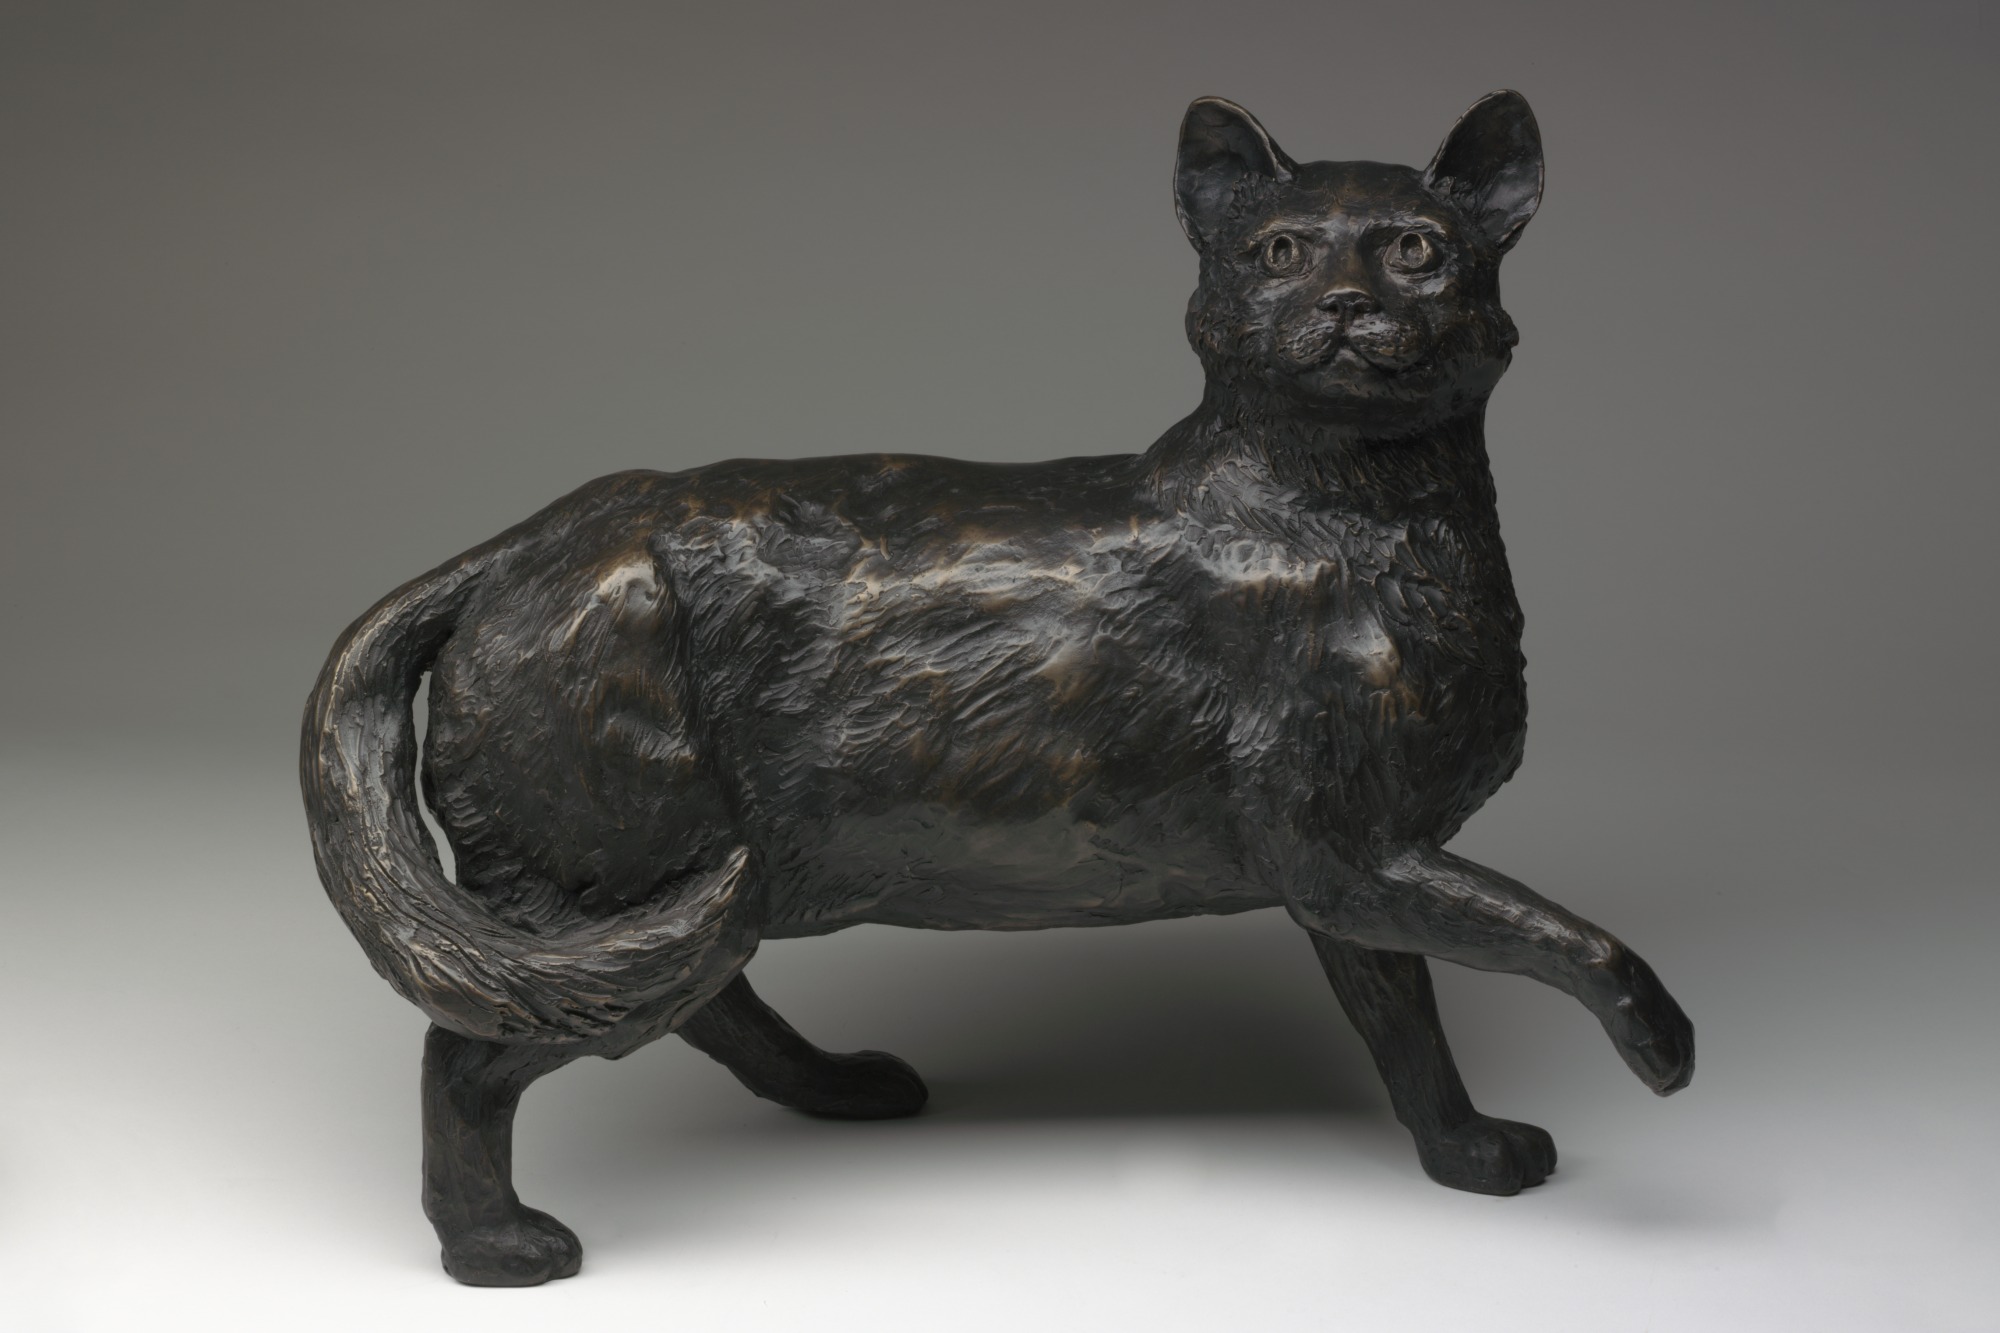 Bronze full-size statue of Matthew Flinders’ cat Trim, who travelled with Flinders during his circumnavigation of Australia. Sculpted by John Cornwell